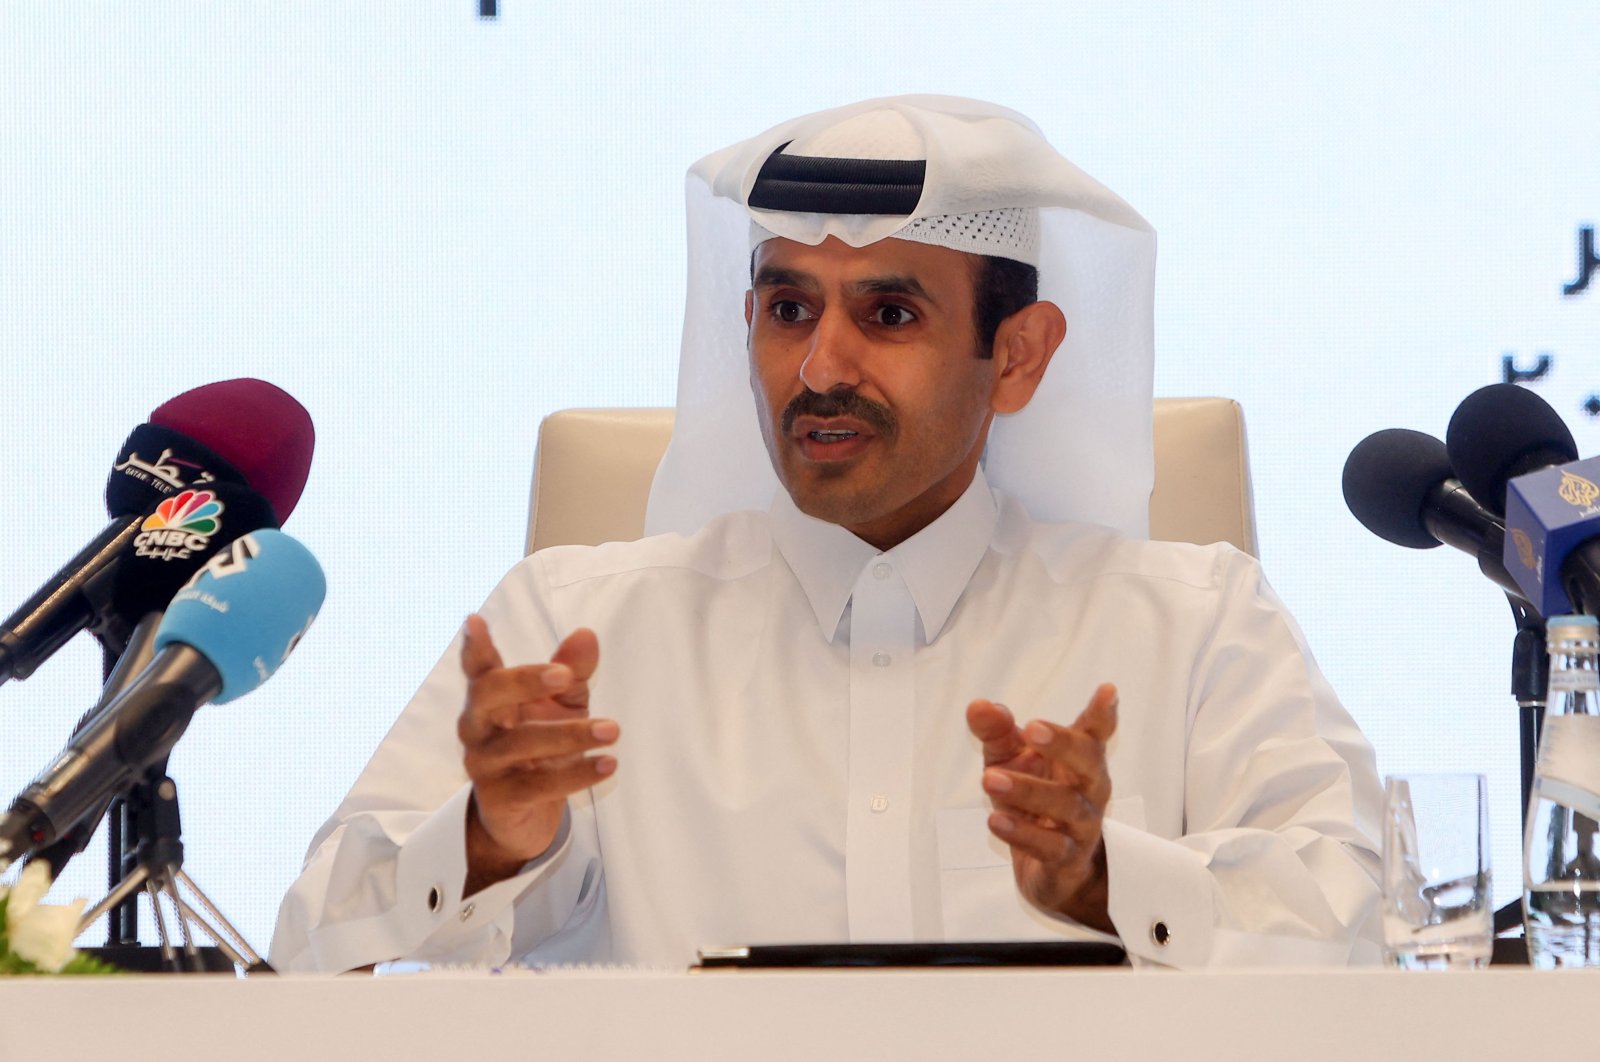 Qatar&#039;s Minister of State for Energy Affairs and President and CEO of QatarEnergy Saad Sherida Al Kaabi speaks at a press conference in Doha, Qatar, Oct. 30, 2022. (AFP Photo)